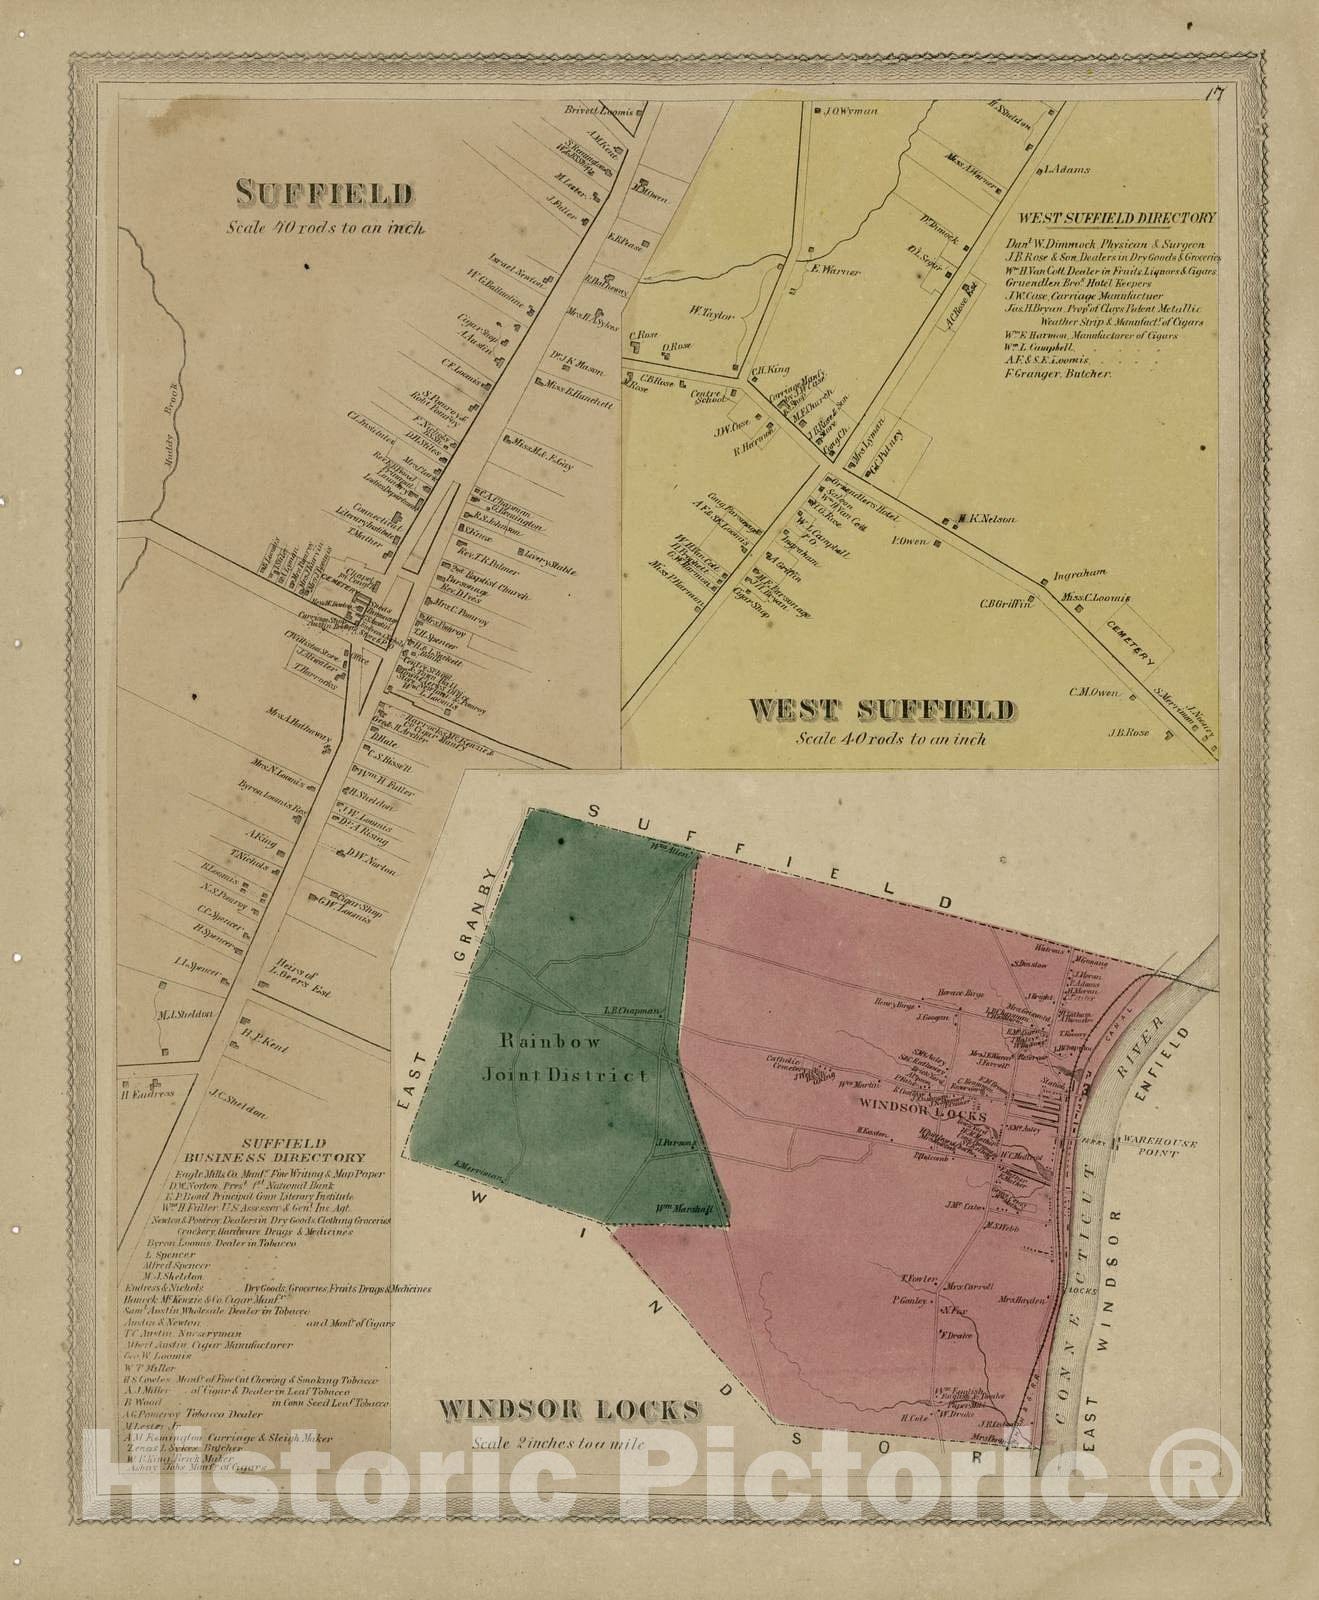 Historic 1869 Map - Atlas of Hartford and Tolland Counties - Suffield; West Suffield; Windsor Locks - Atlas of Hartford and Tolland Counties, Conn.